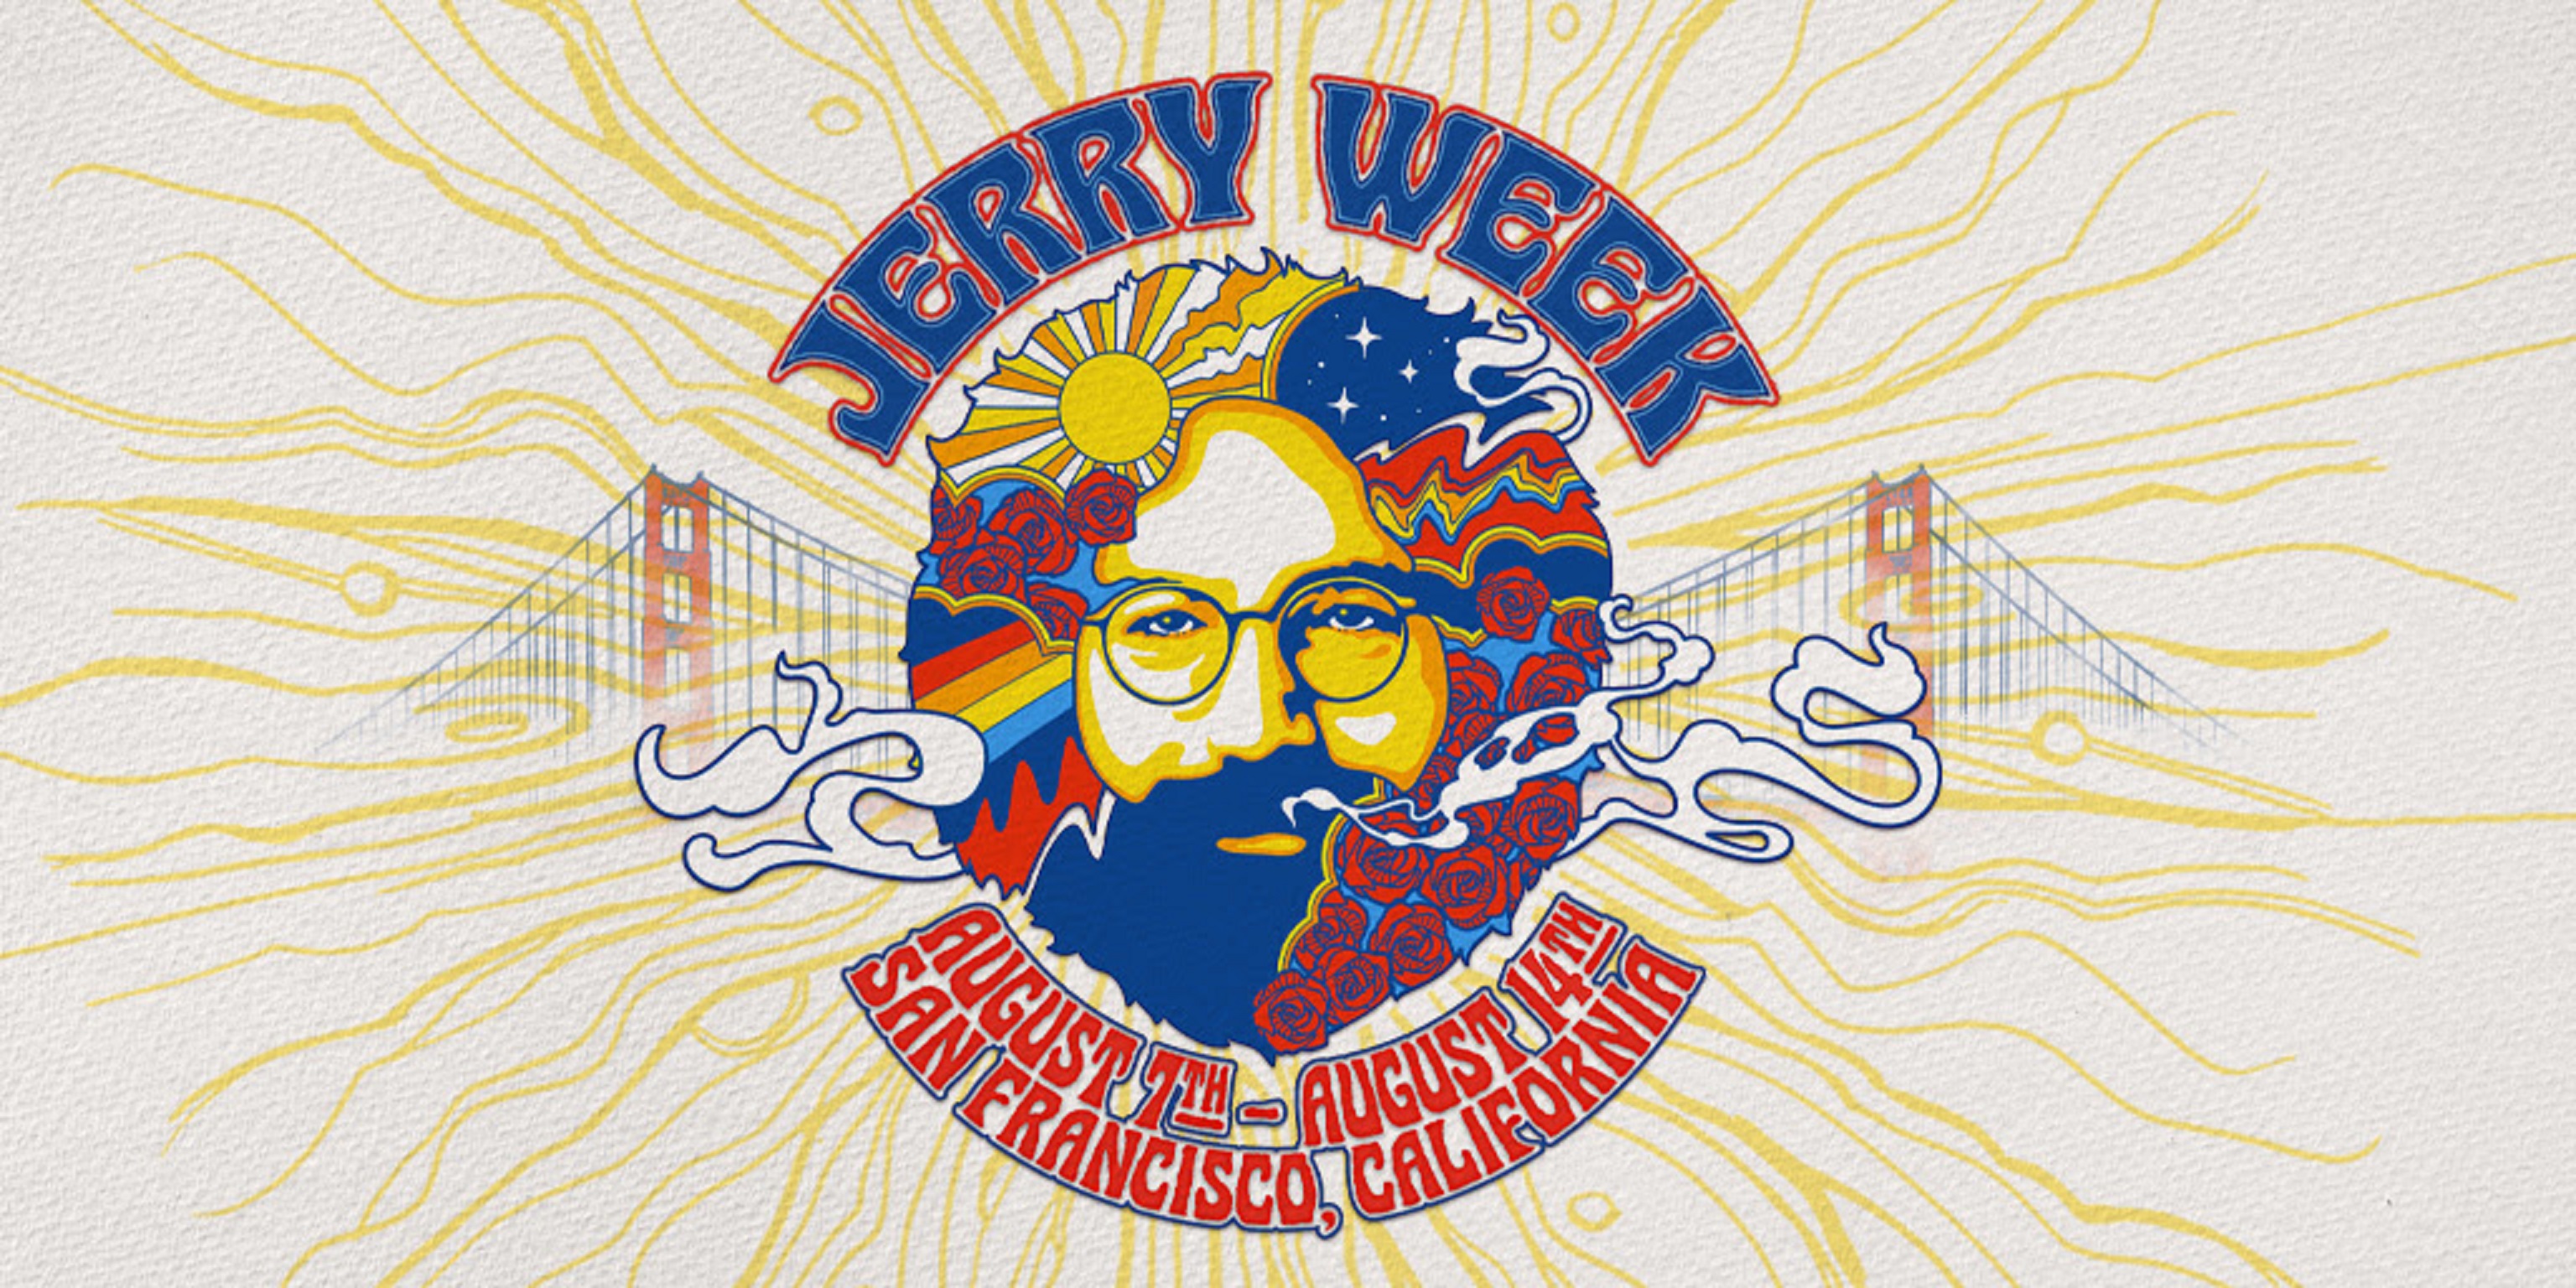 Celebrate Jerry with the City of San Francisco